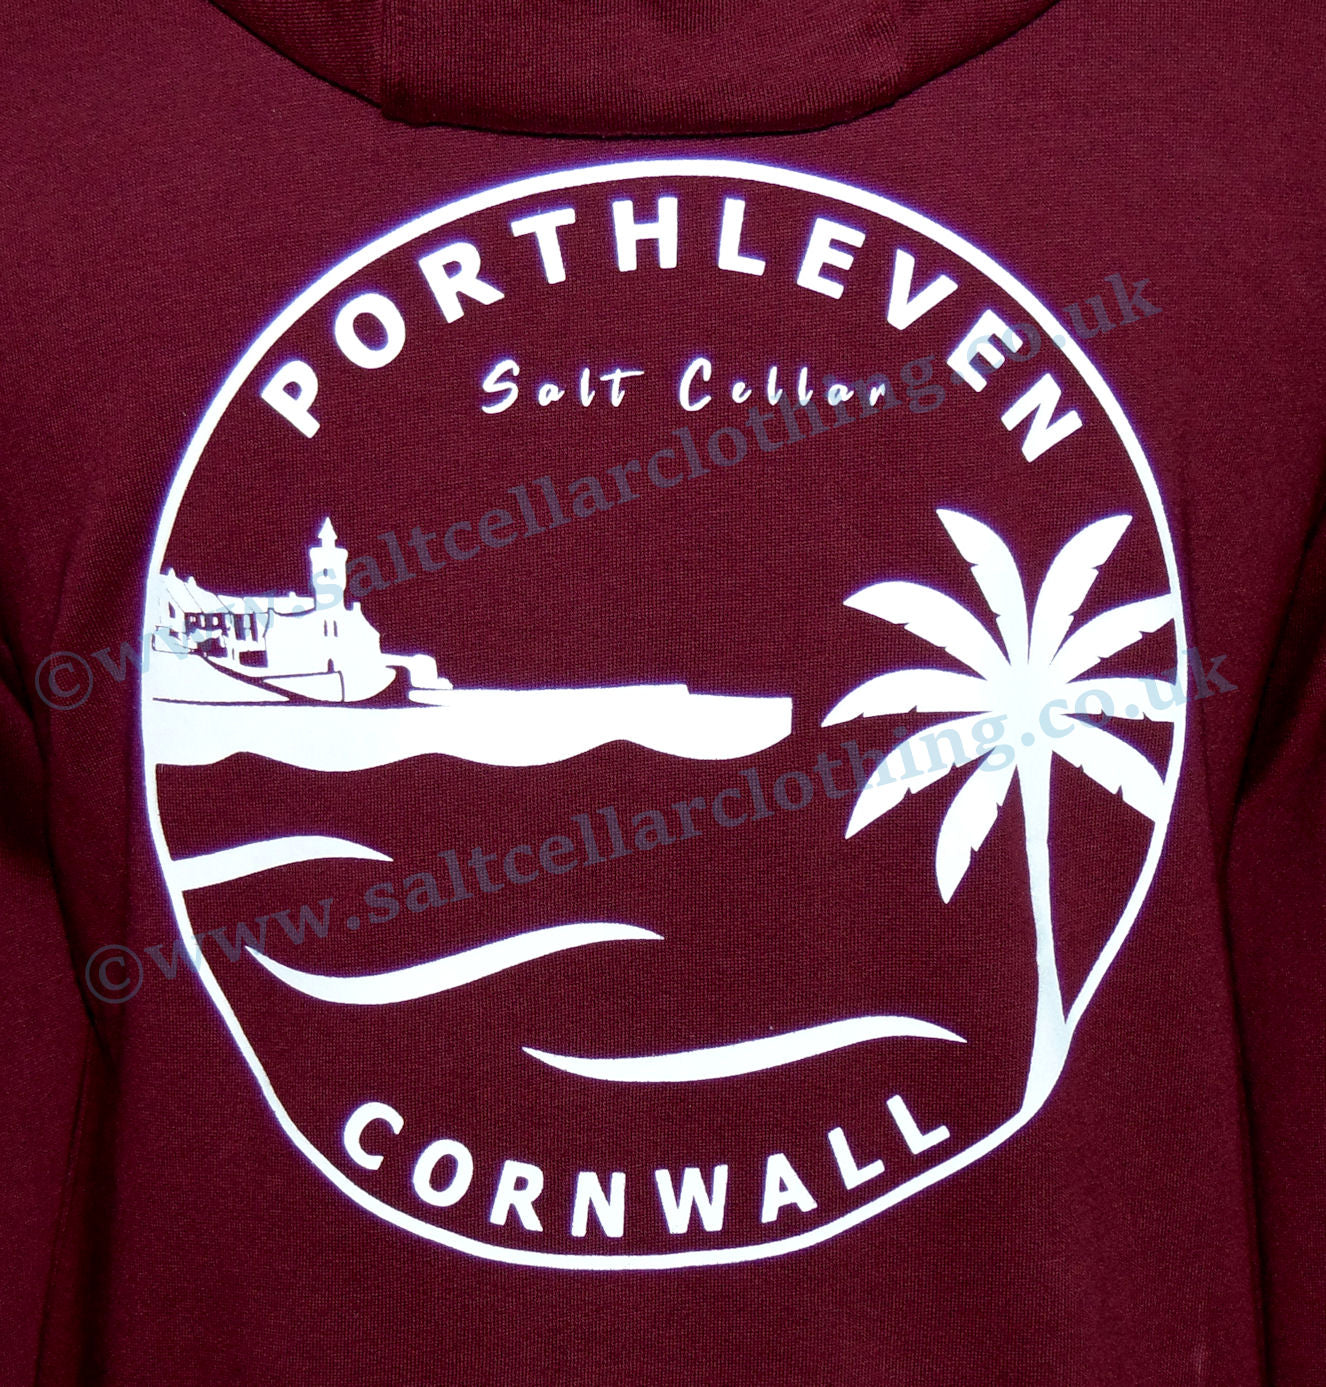 Porthleven Cornwall printed hoodie with palm tree and clock tower